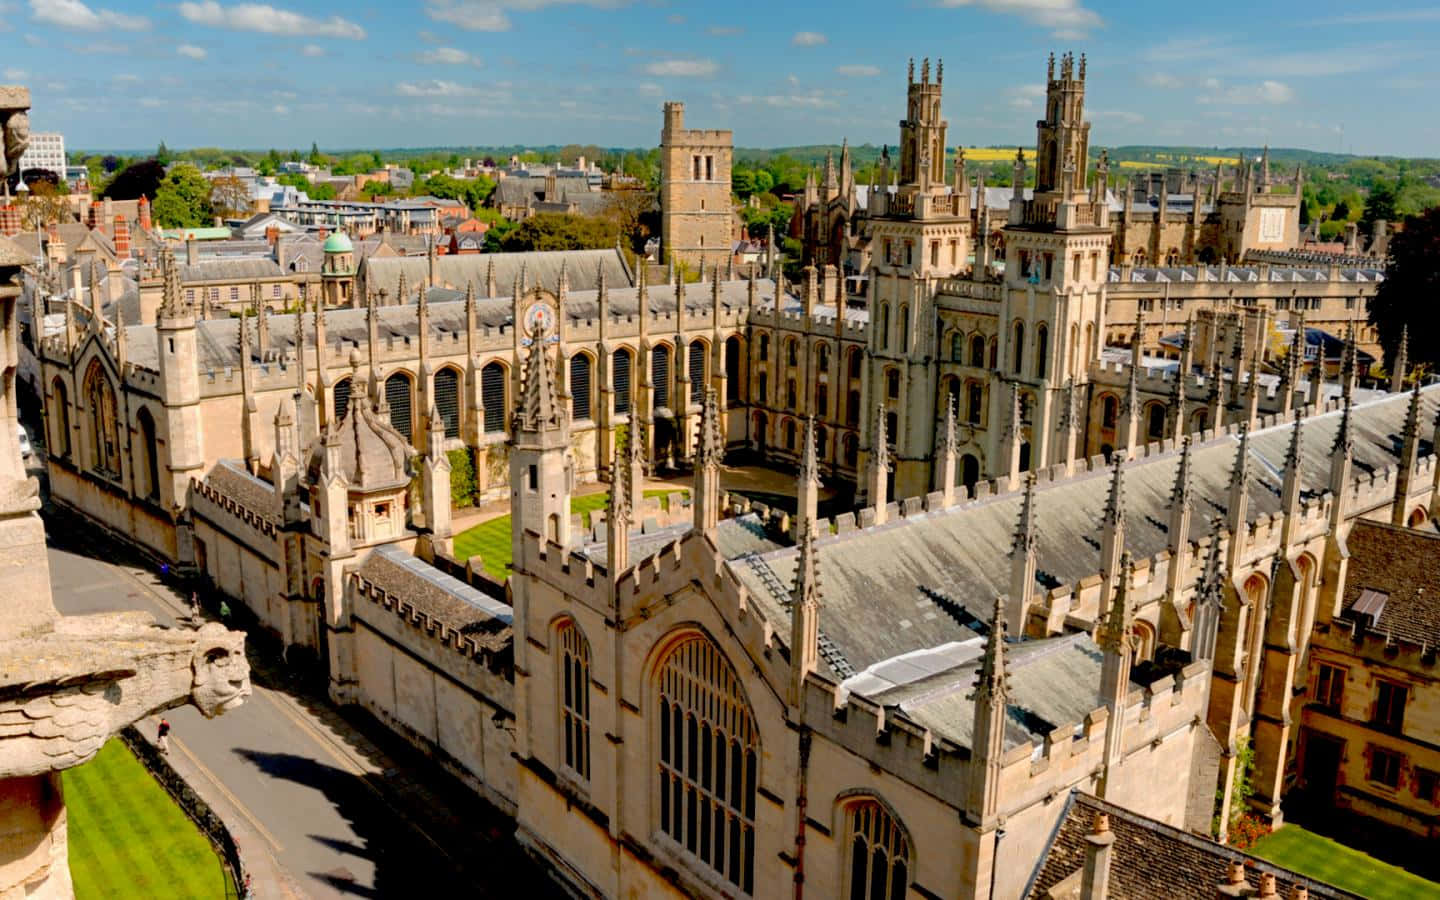 Breathtaking Arial View of All Souls College, Oxford University Wallpaper